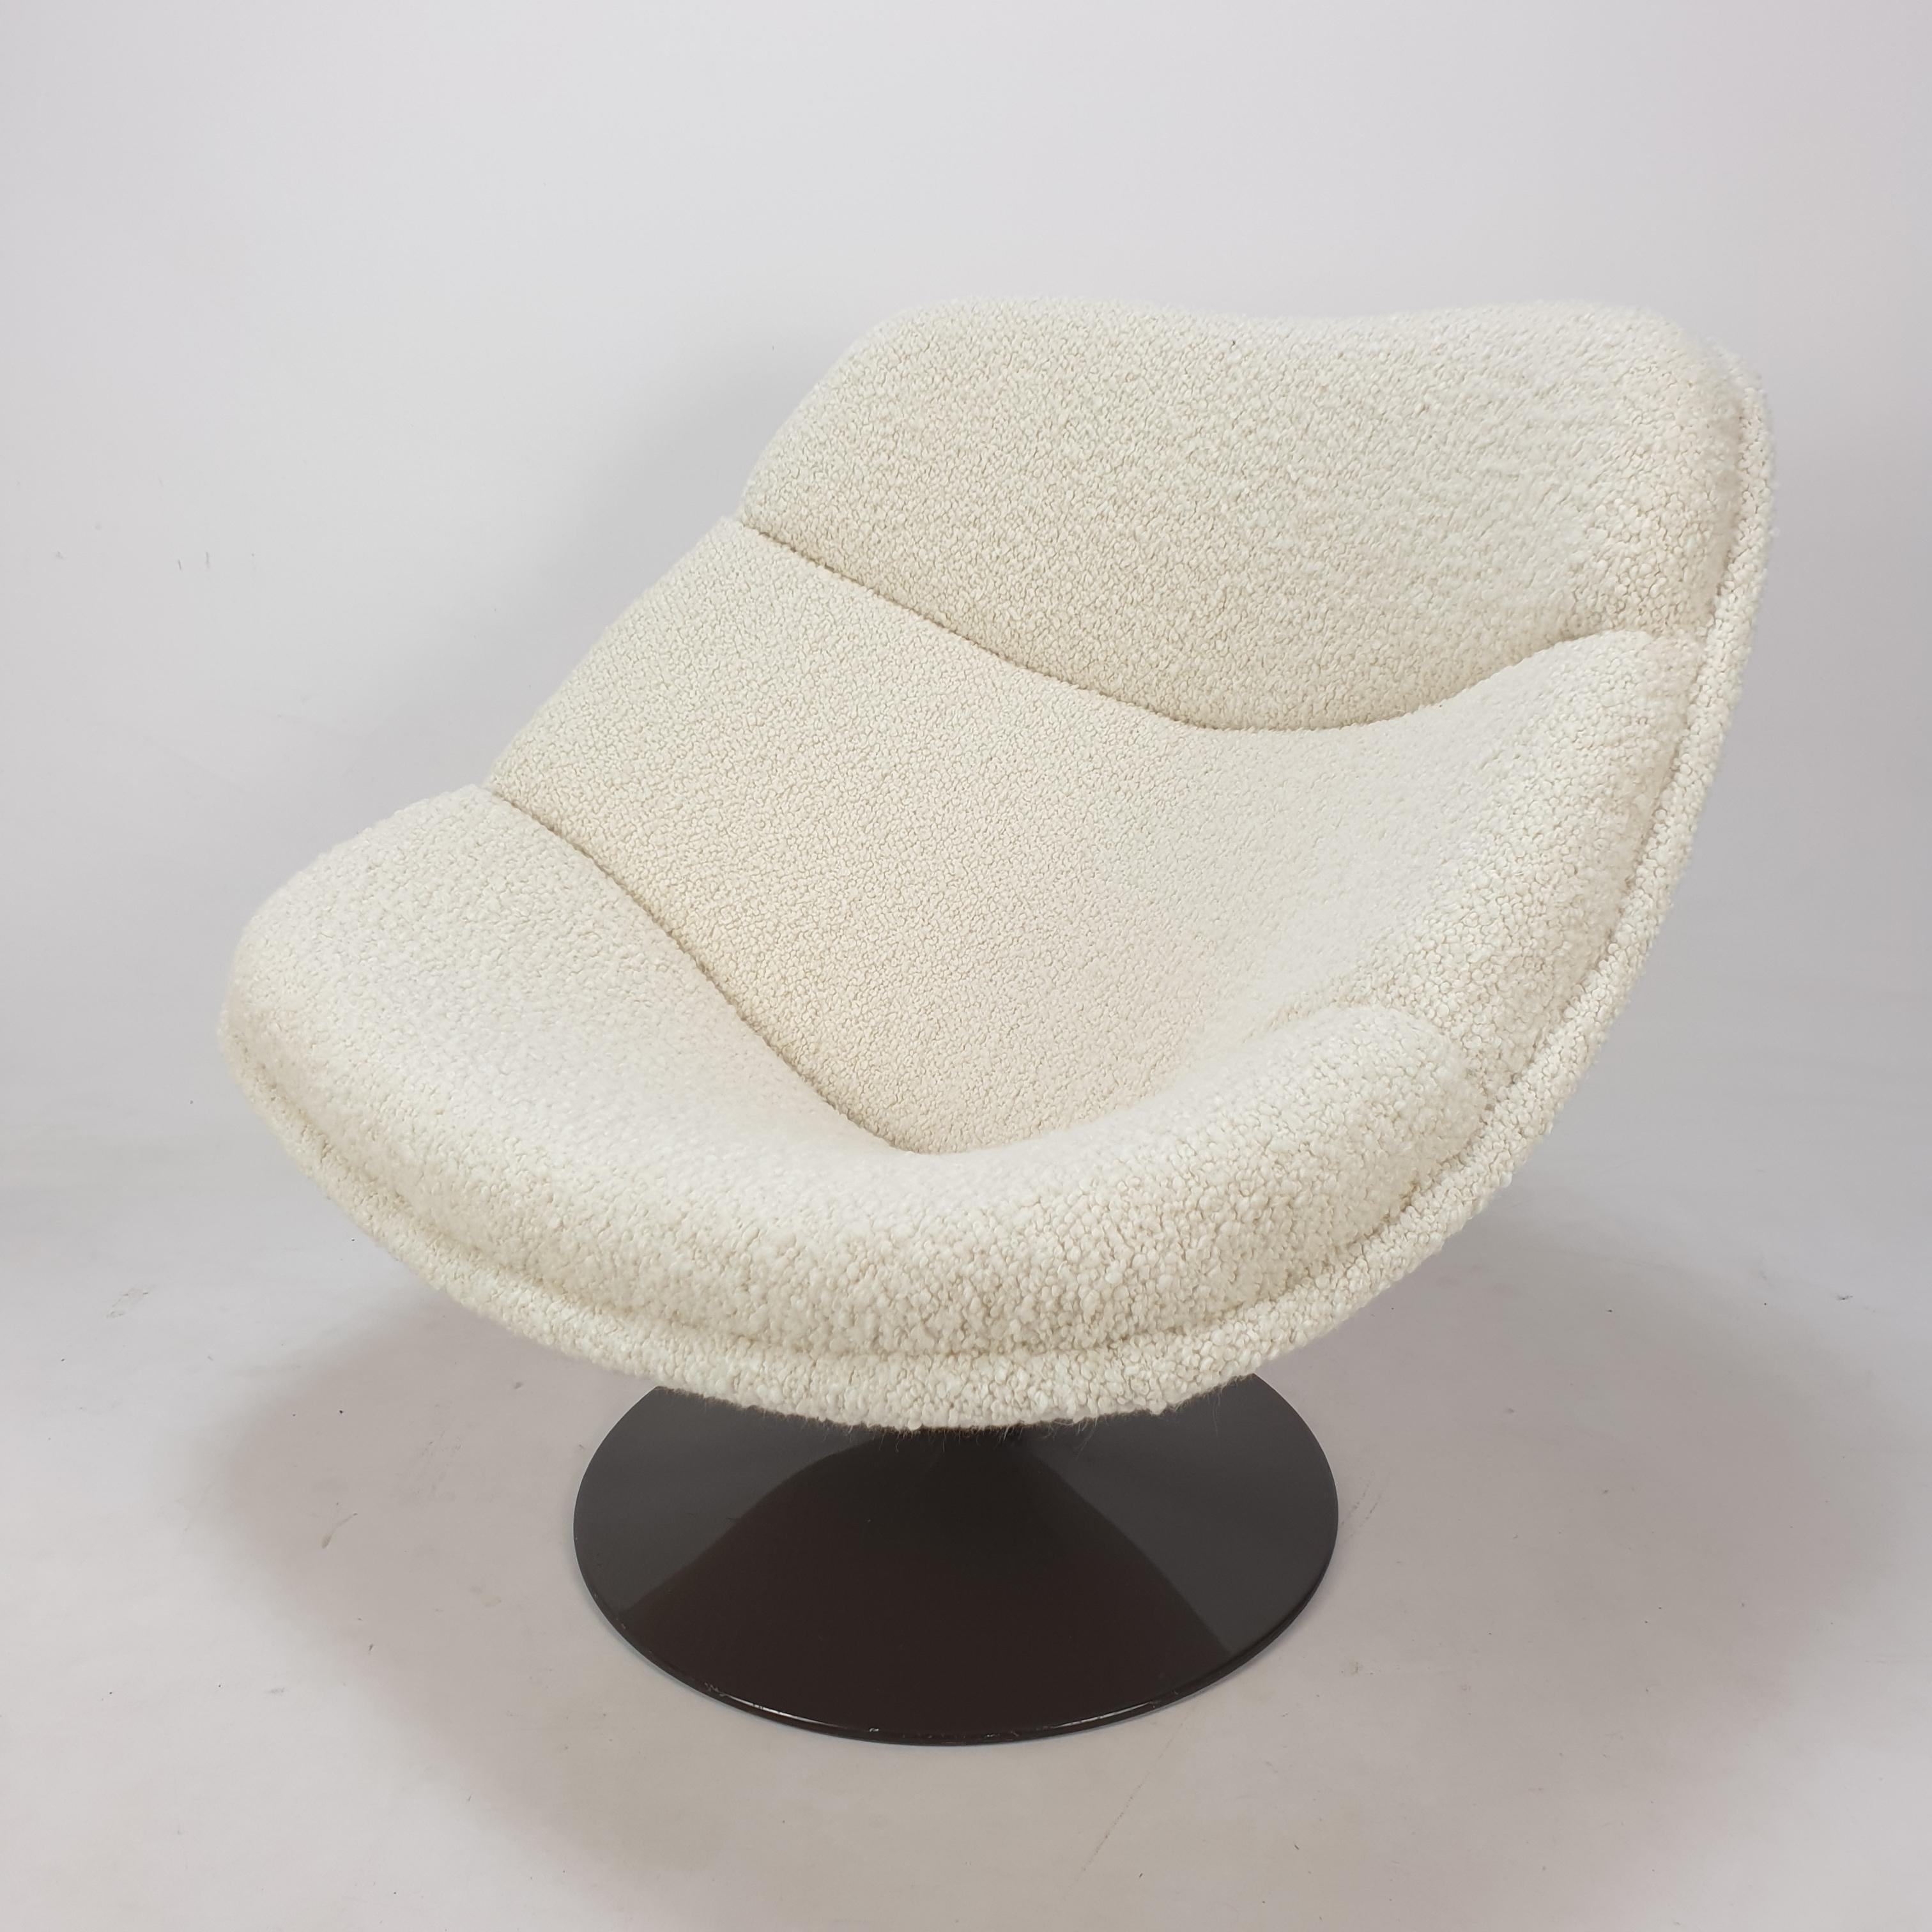 Lovely lounge chair set, designed by Pierre Paulin in 1961.
Two very comfortable pivoting chairs with a ottoman.

This model F557 is the first edition of the oyster chair and is shortly produced (till 1965), that's why this chair is rare.